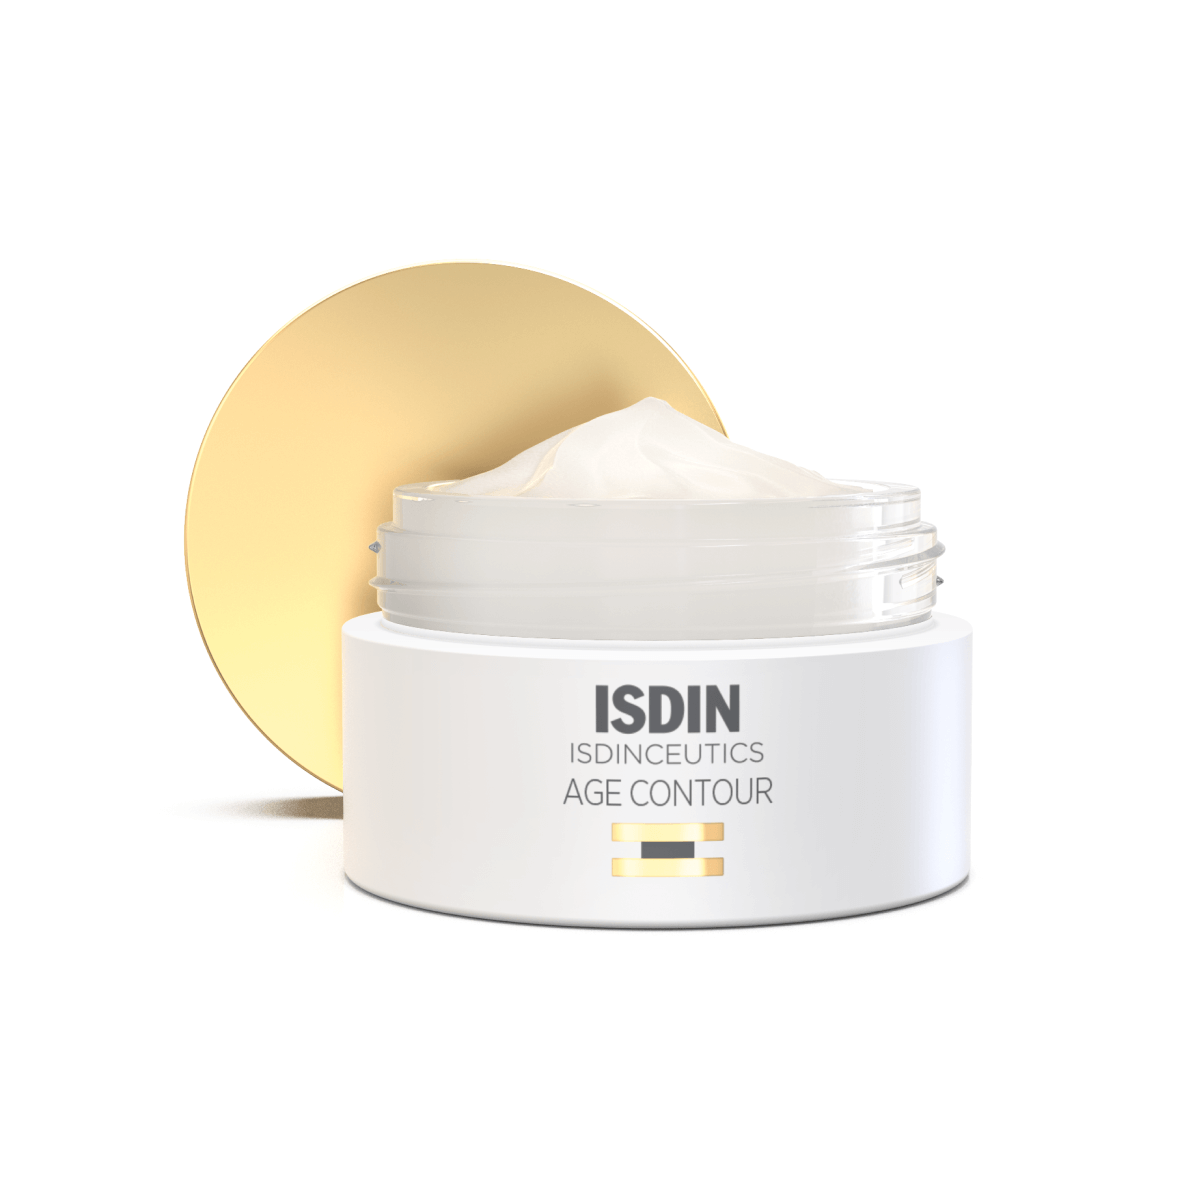 isdin age contour cream from the isdin black friday sale, unlidded on a white background